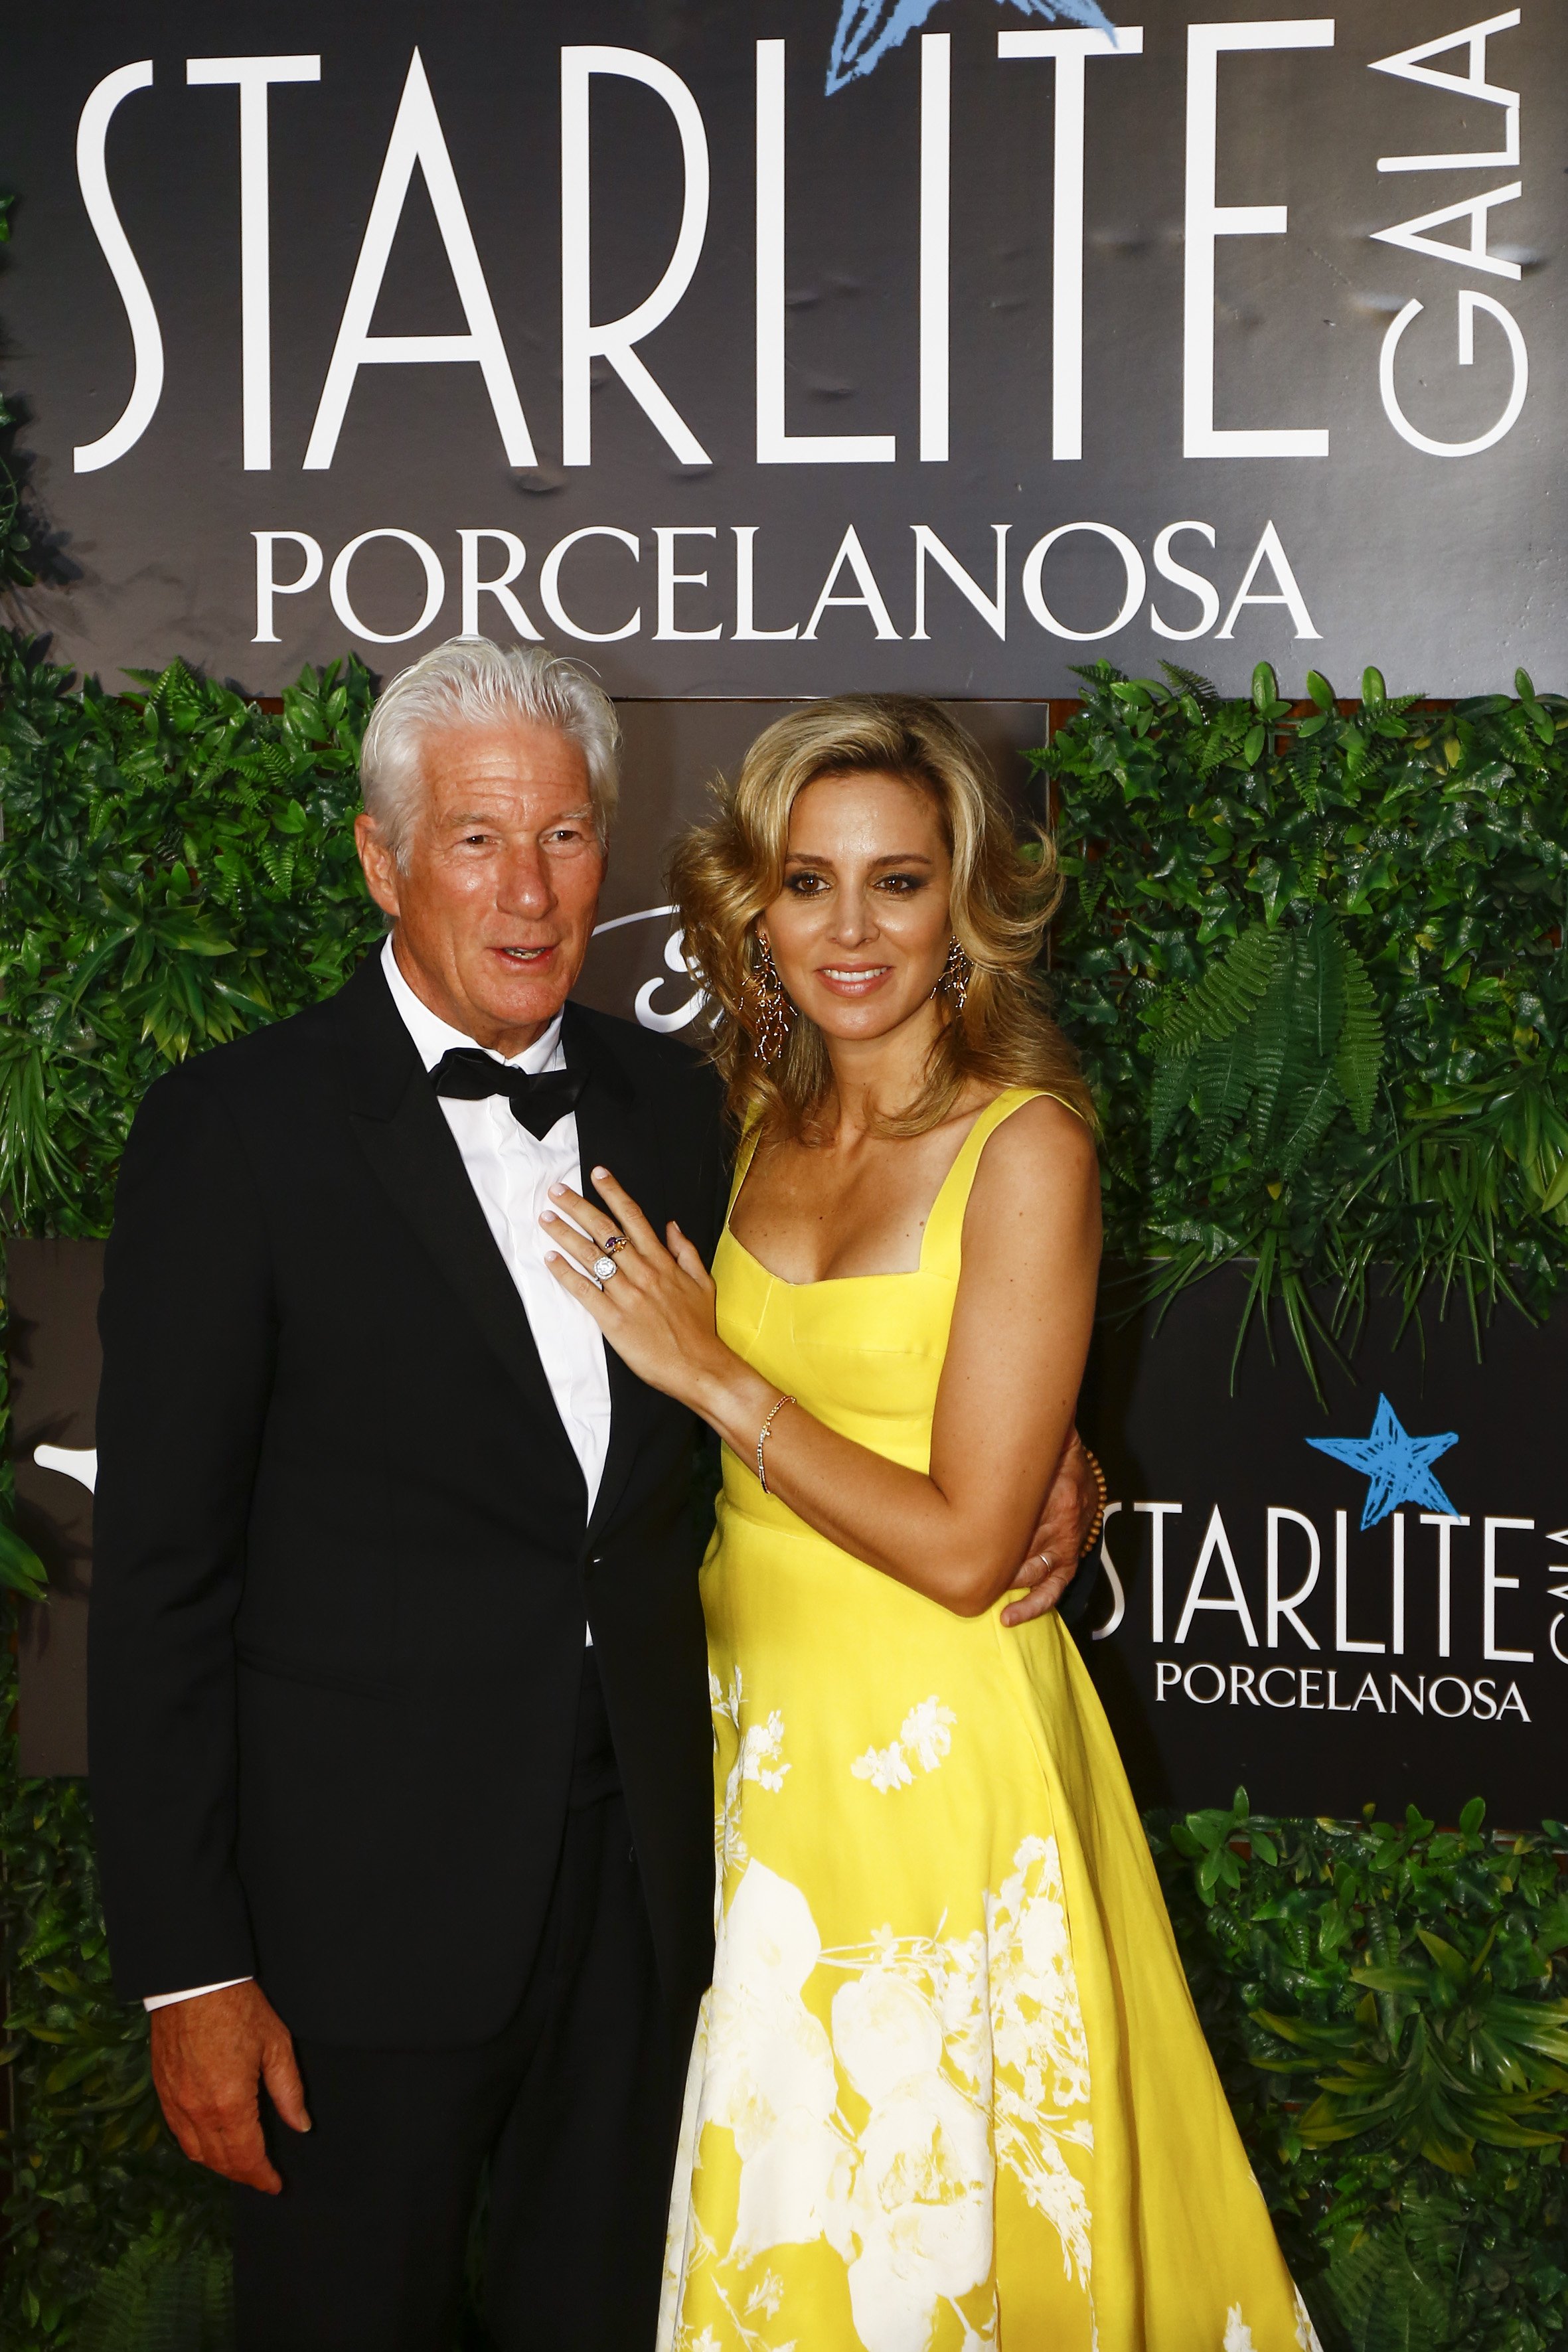 Actor Richard Gere and publicist Alejandra Silva attend the Starlite Porcelanosa Gala 2022 at La Cantera on August 14, 2022 in Marbella, Spain ┃Source: Getty Images